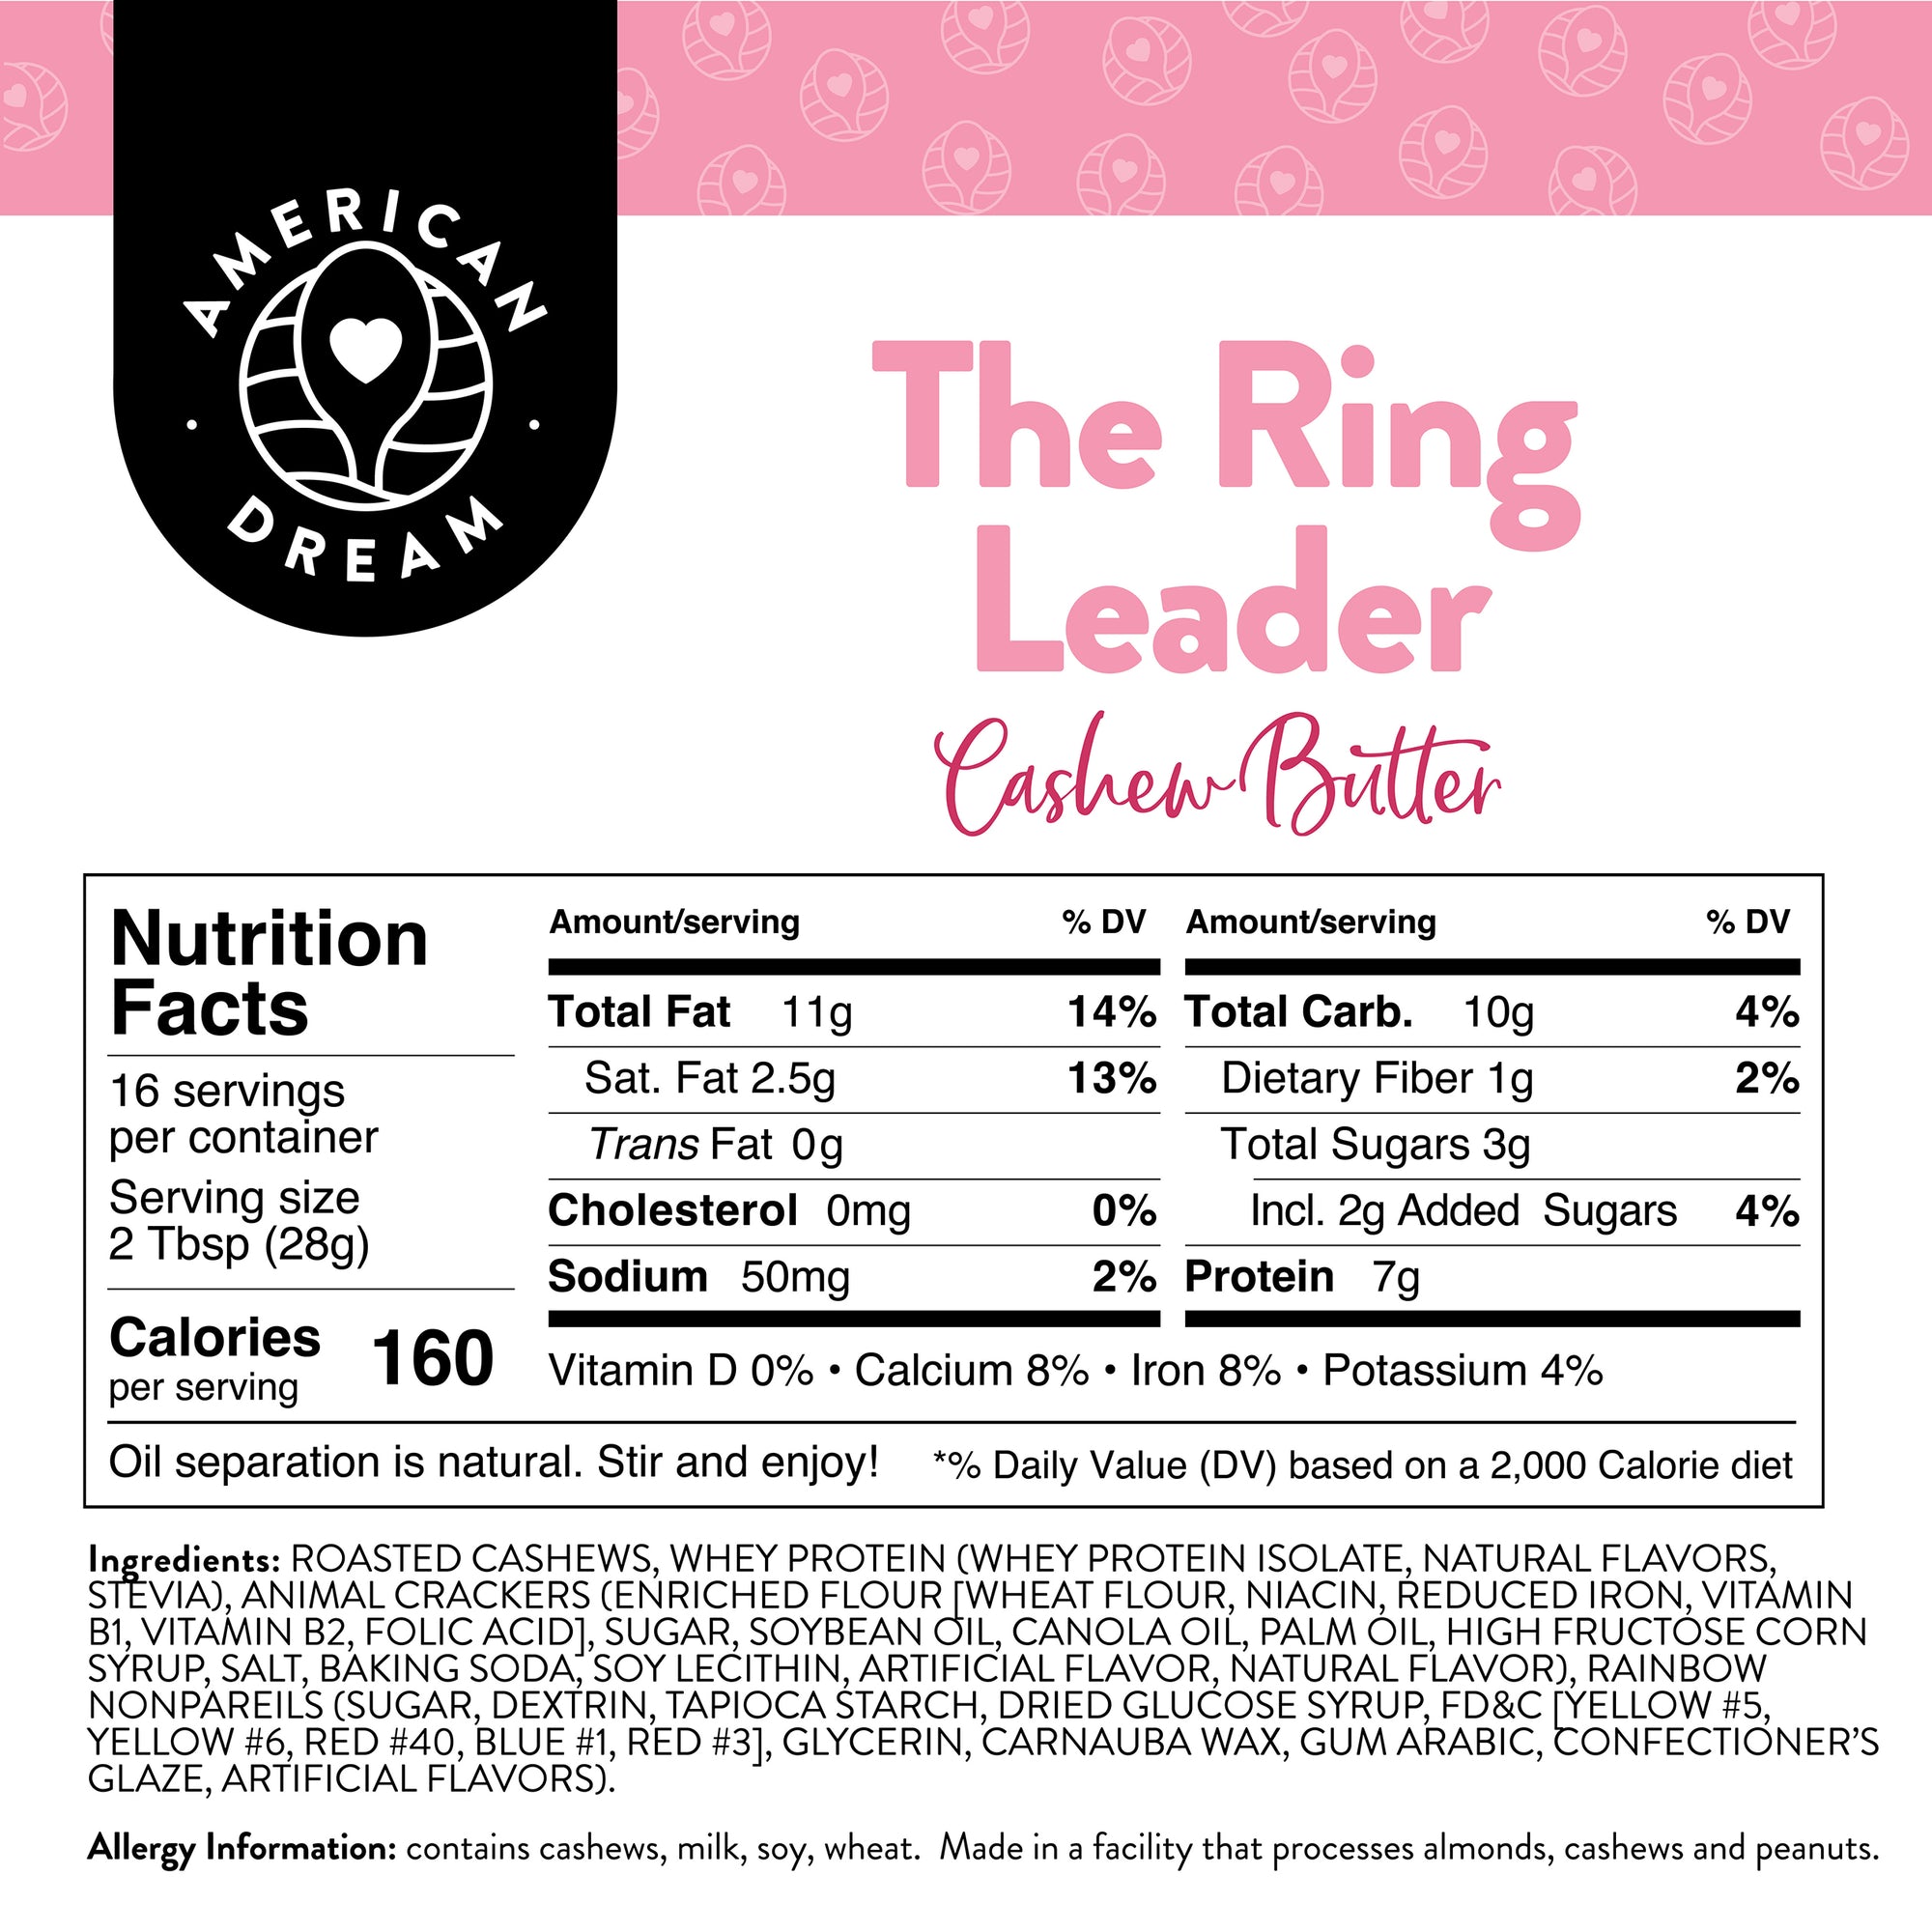 The Ring Leader Cashew Butter